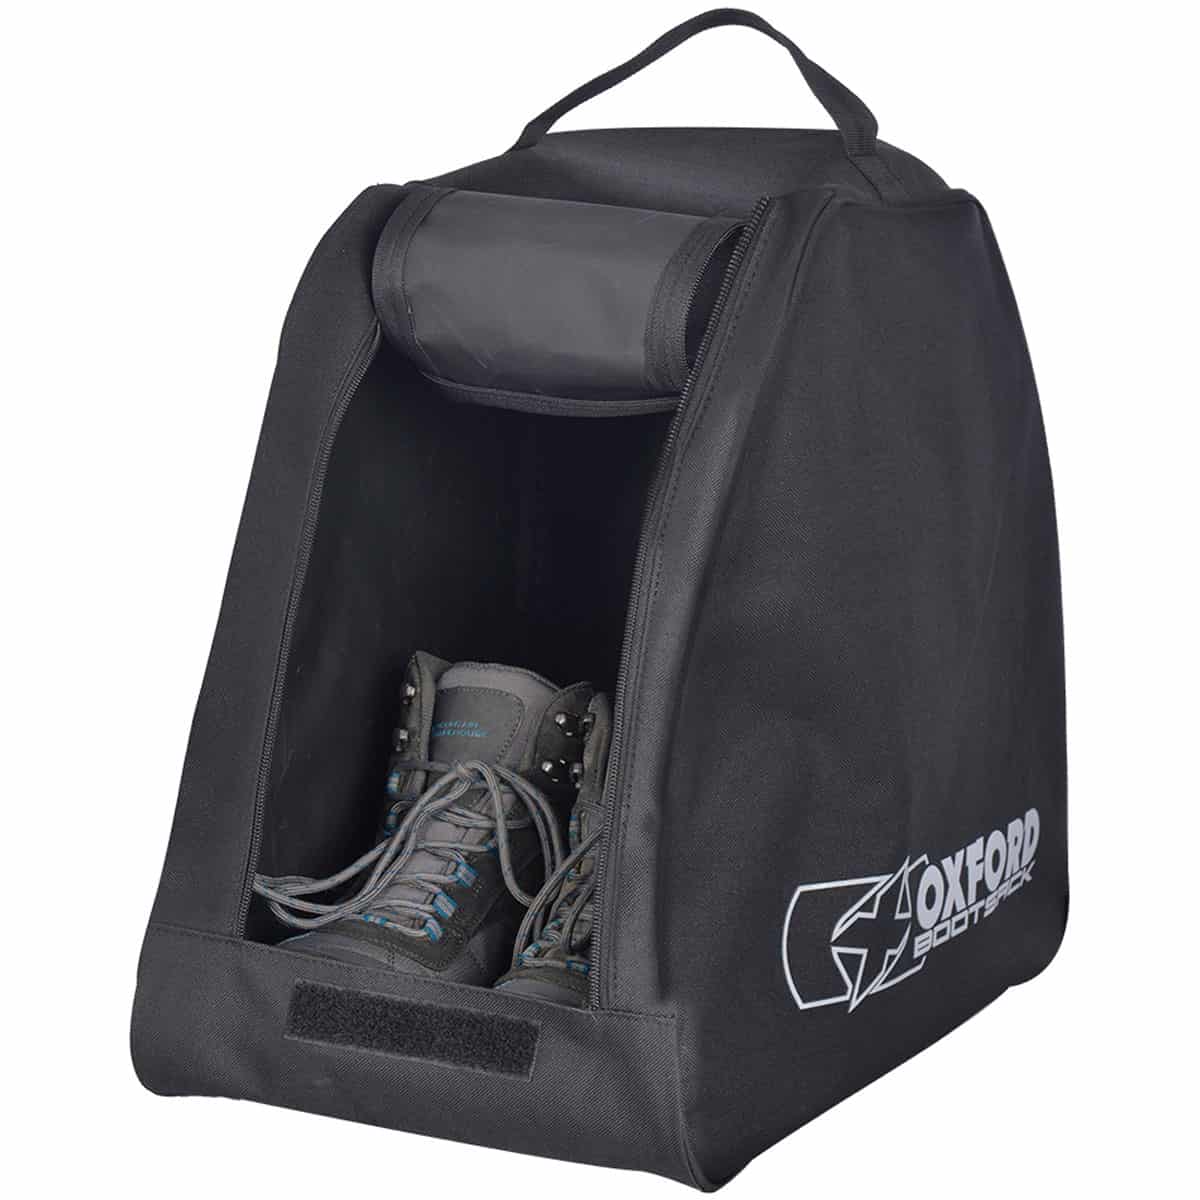 Whatever your boot-storing needs, put them in the Oxford Bootsack Essential Boot Carrier